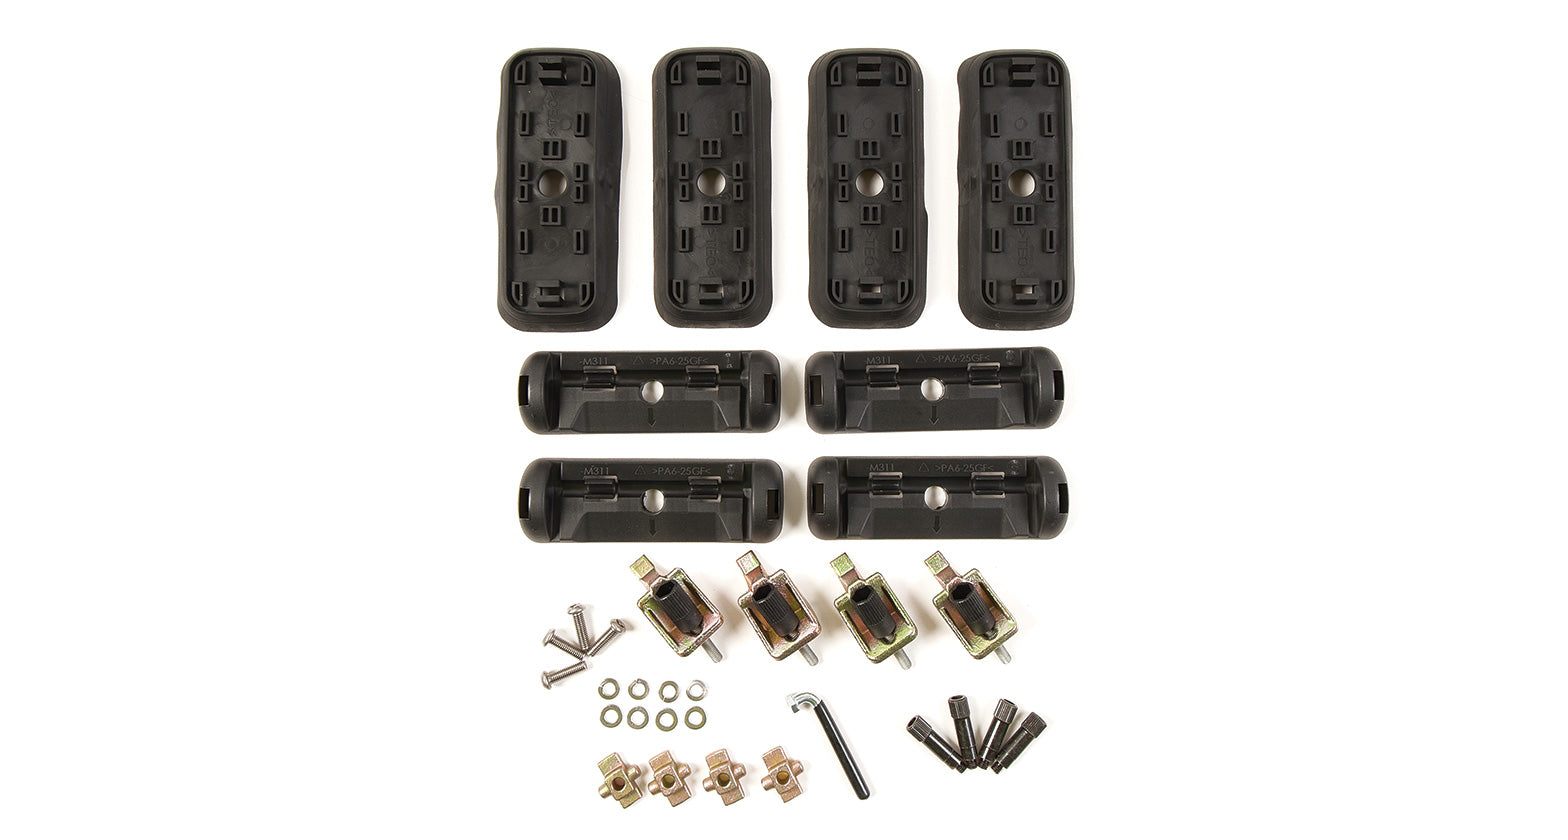 FIXED POINT KIT FOR RHINO 2500 MULTI FIT - DK410